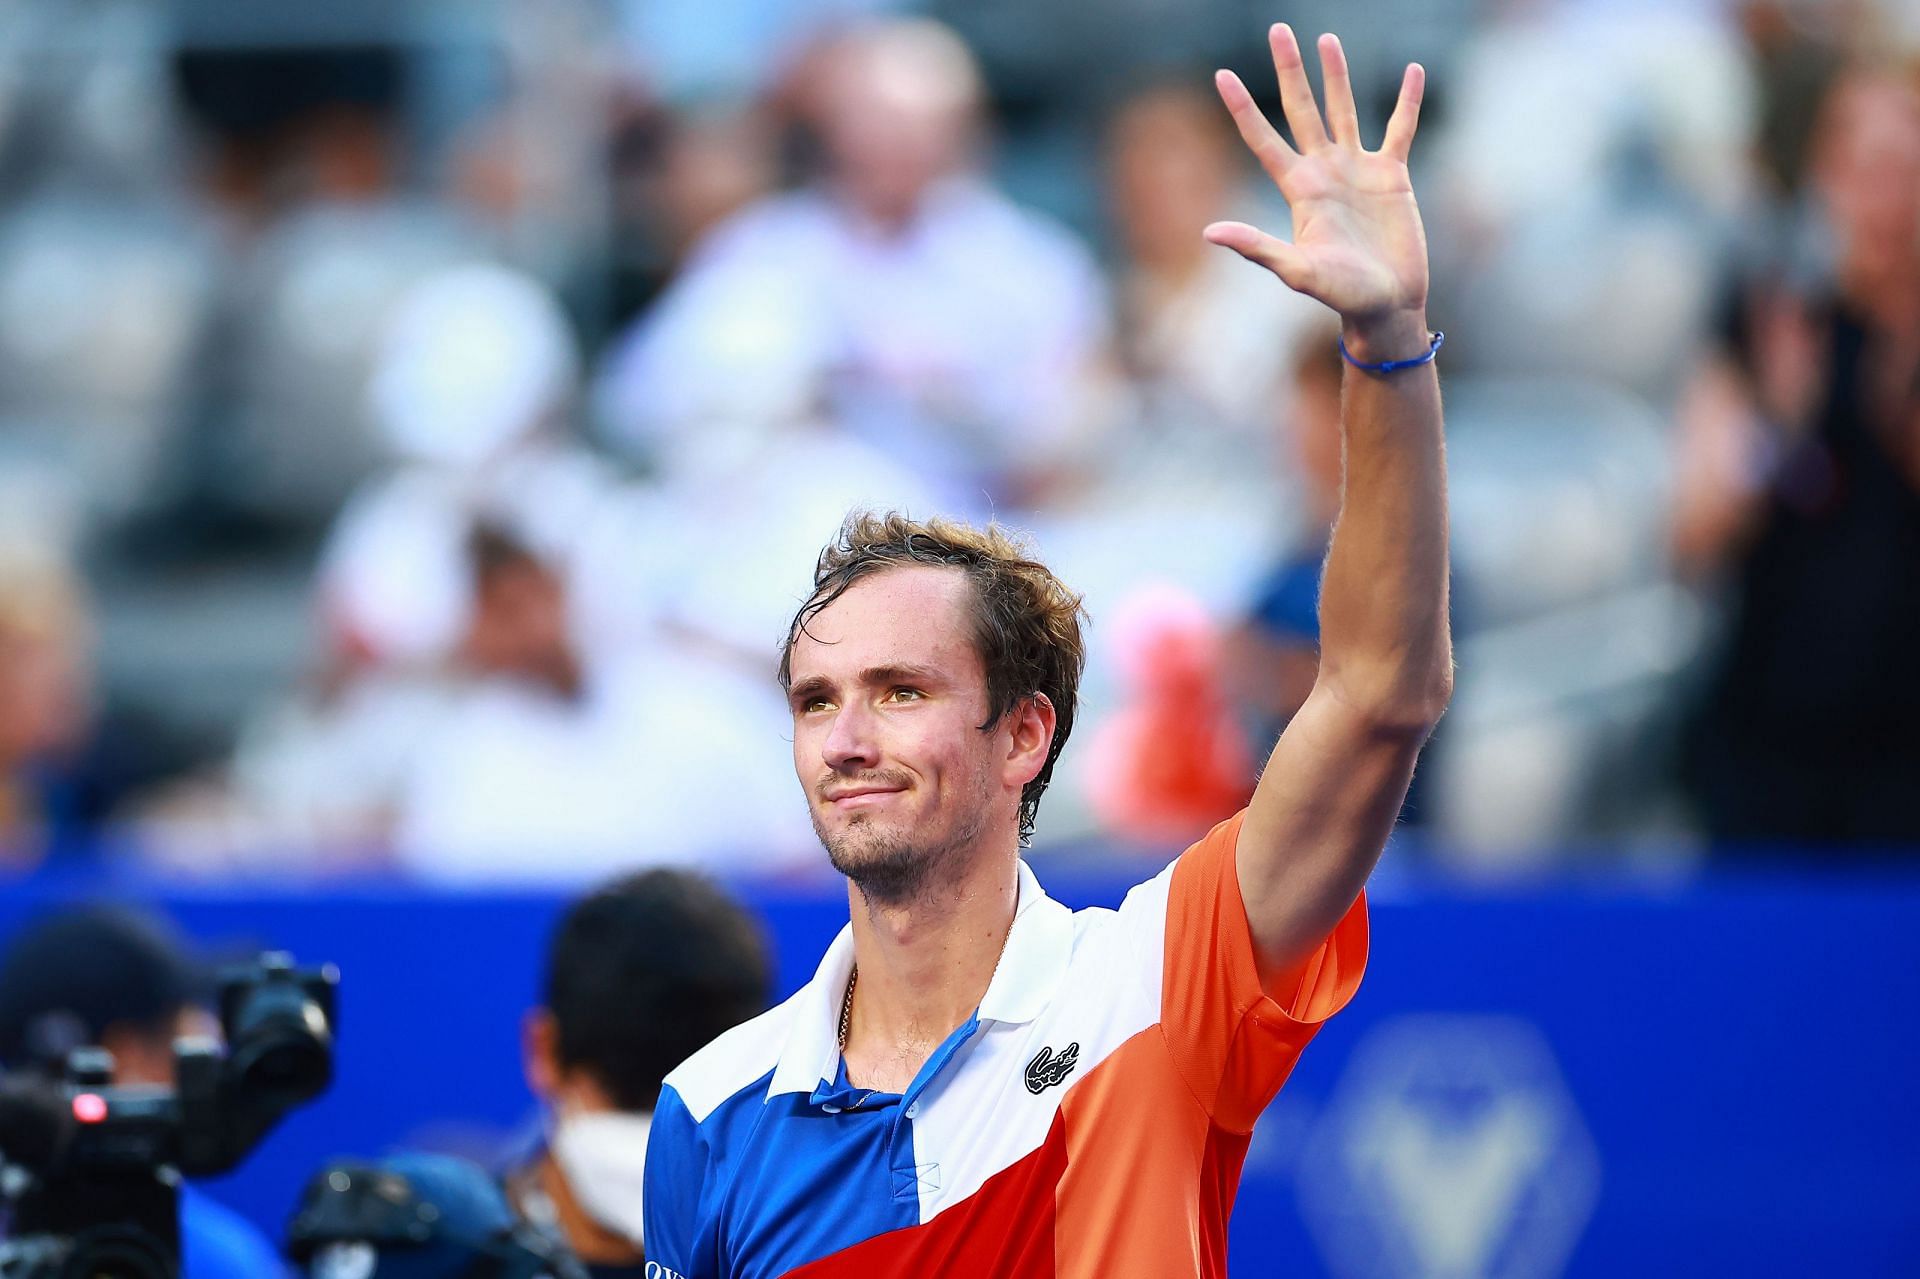 Daniil Medvedev reacts after winning his quarter-final match in Acapulco